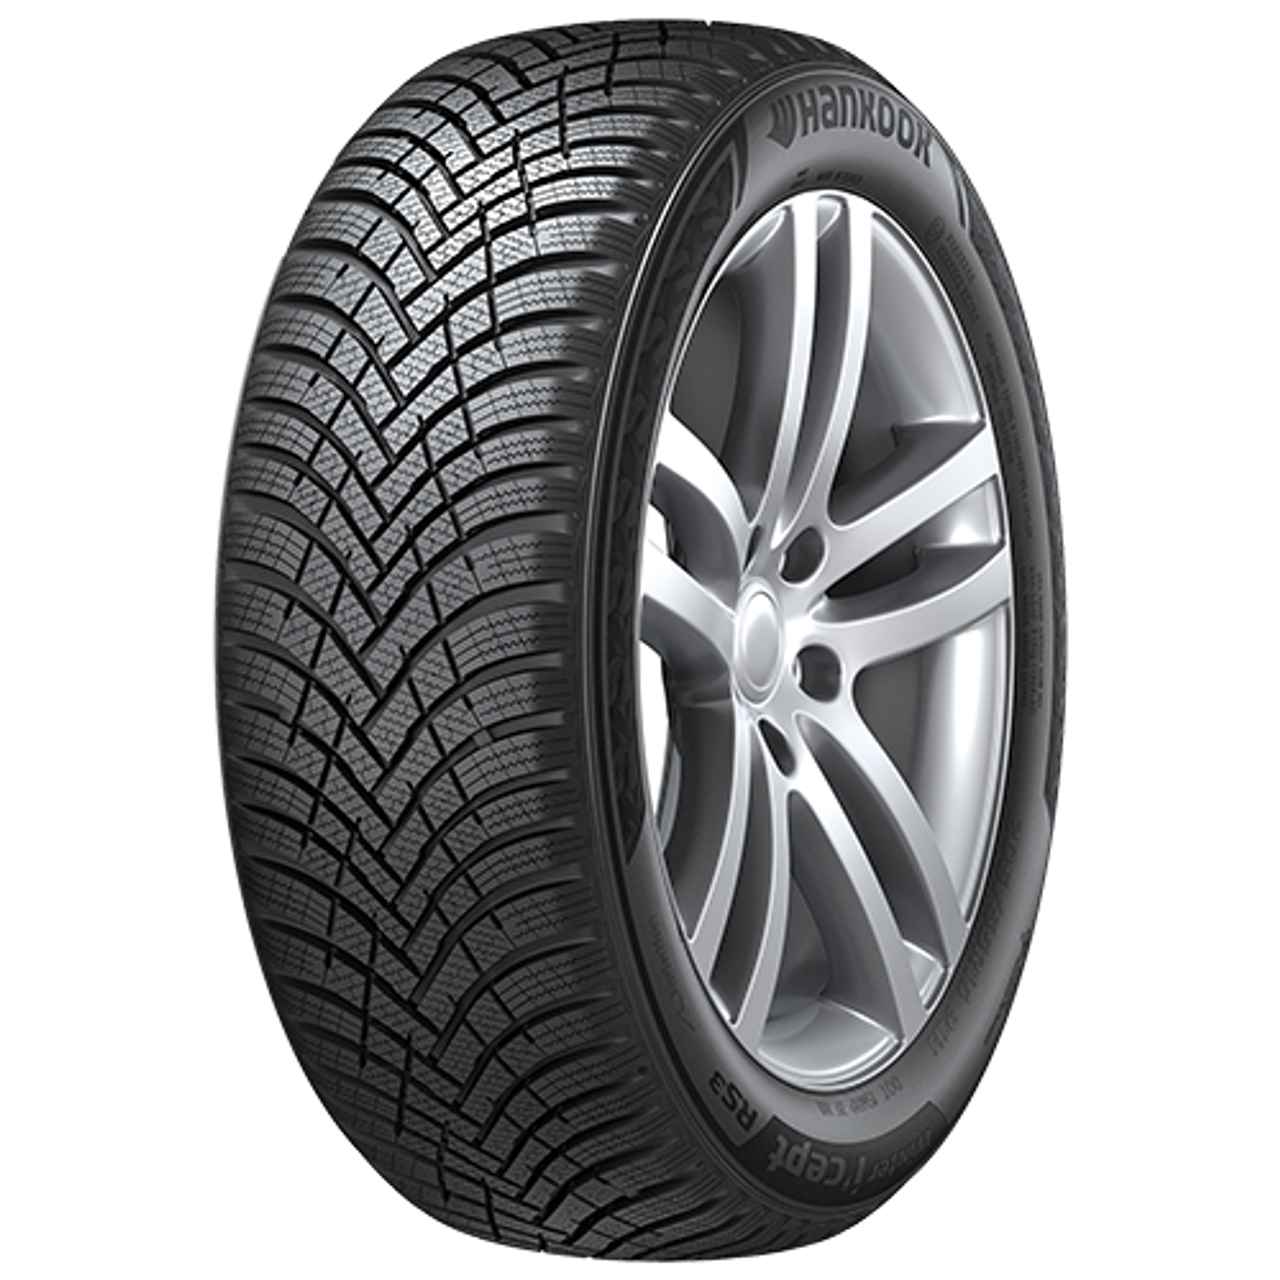 HANKOOK WINTER I*CEPT RS3 195/65R15 95T BSW